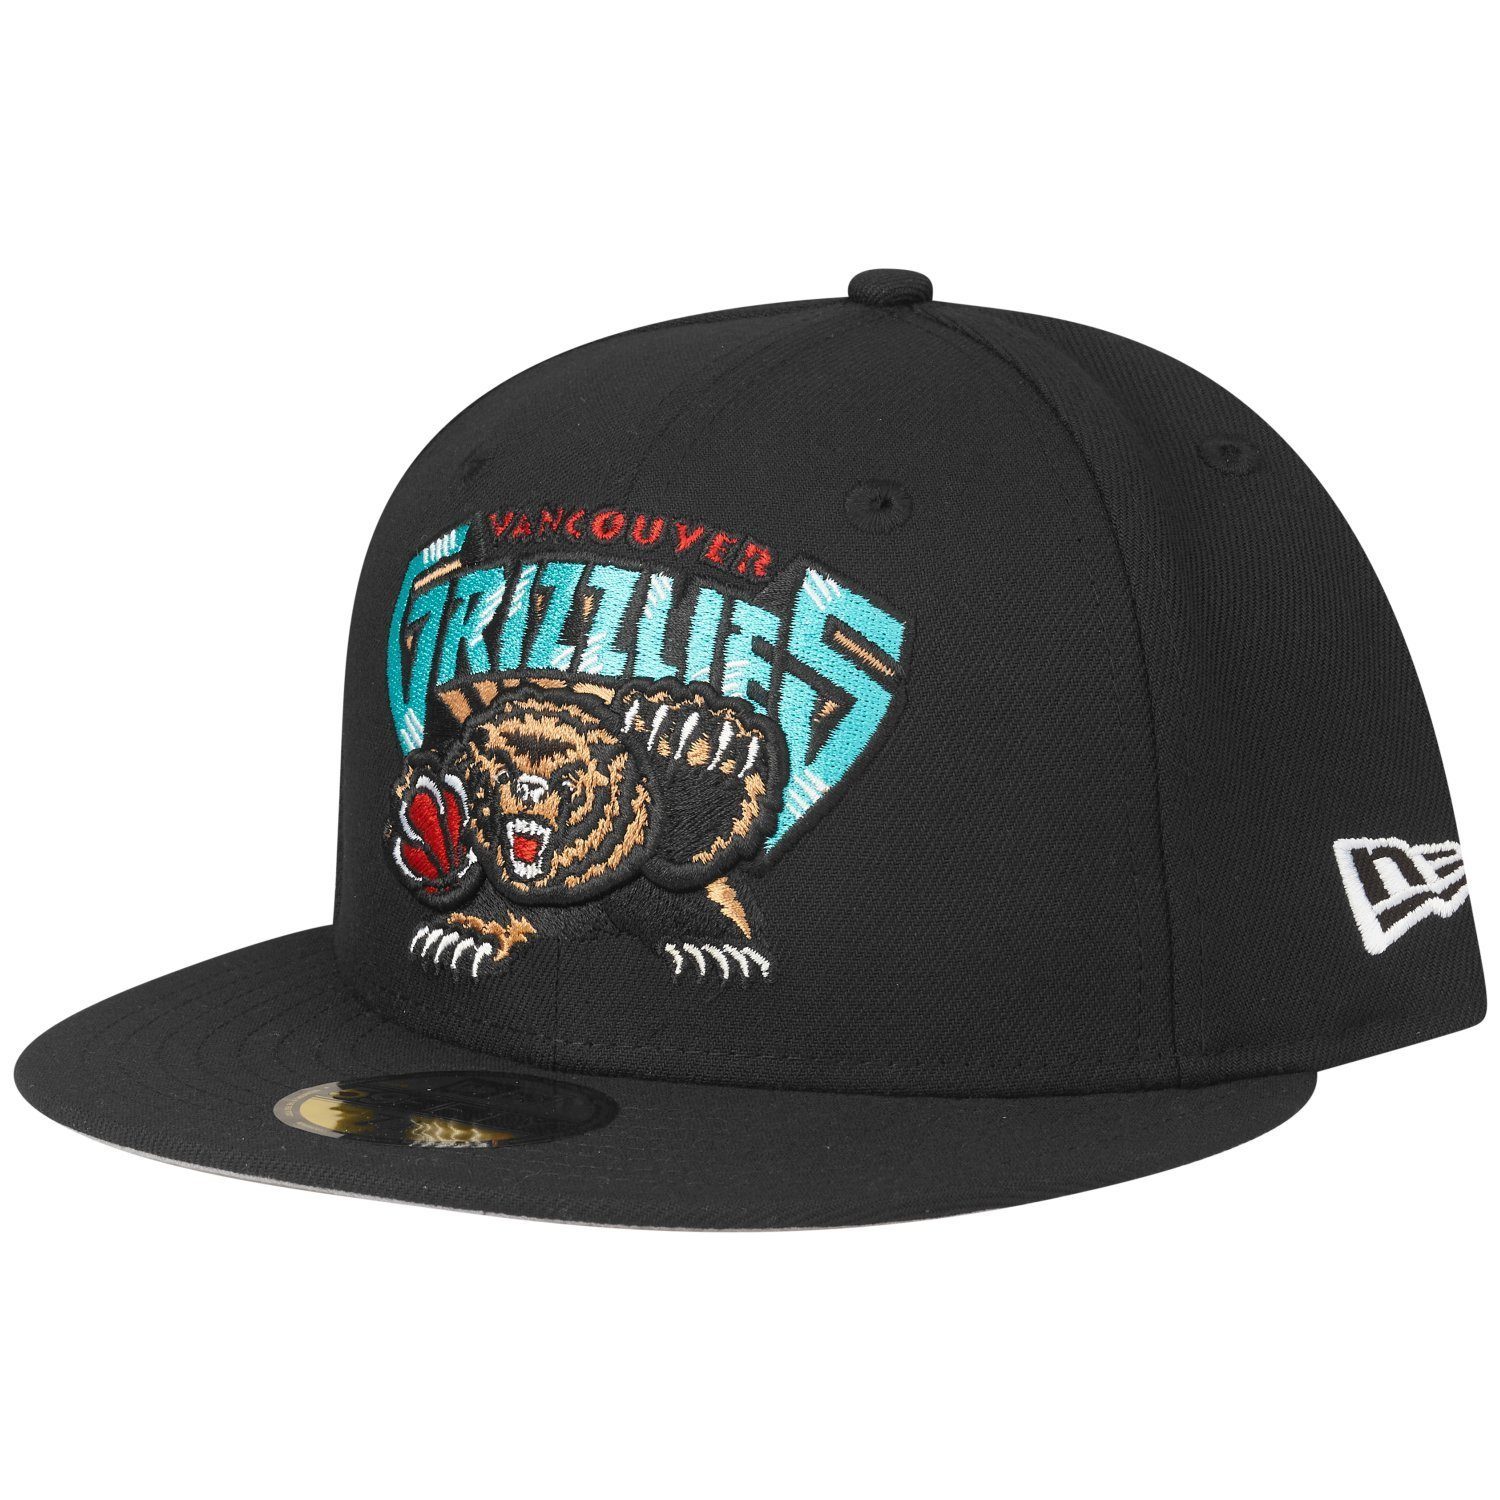 New Era Fitted Cap 59Fifty NBA Memphis Grizzlies | Fitted Caps